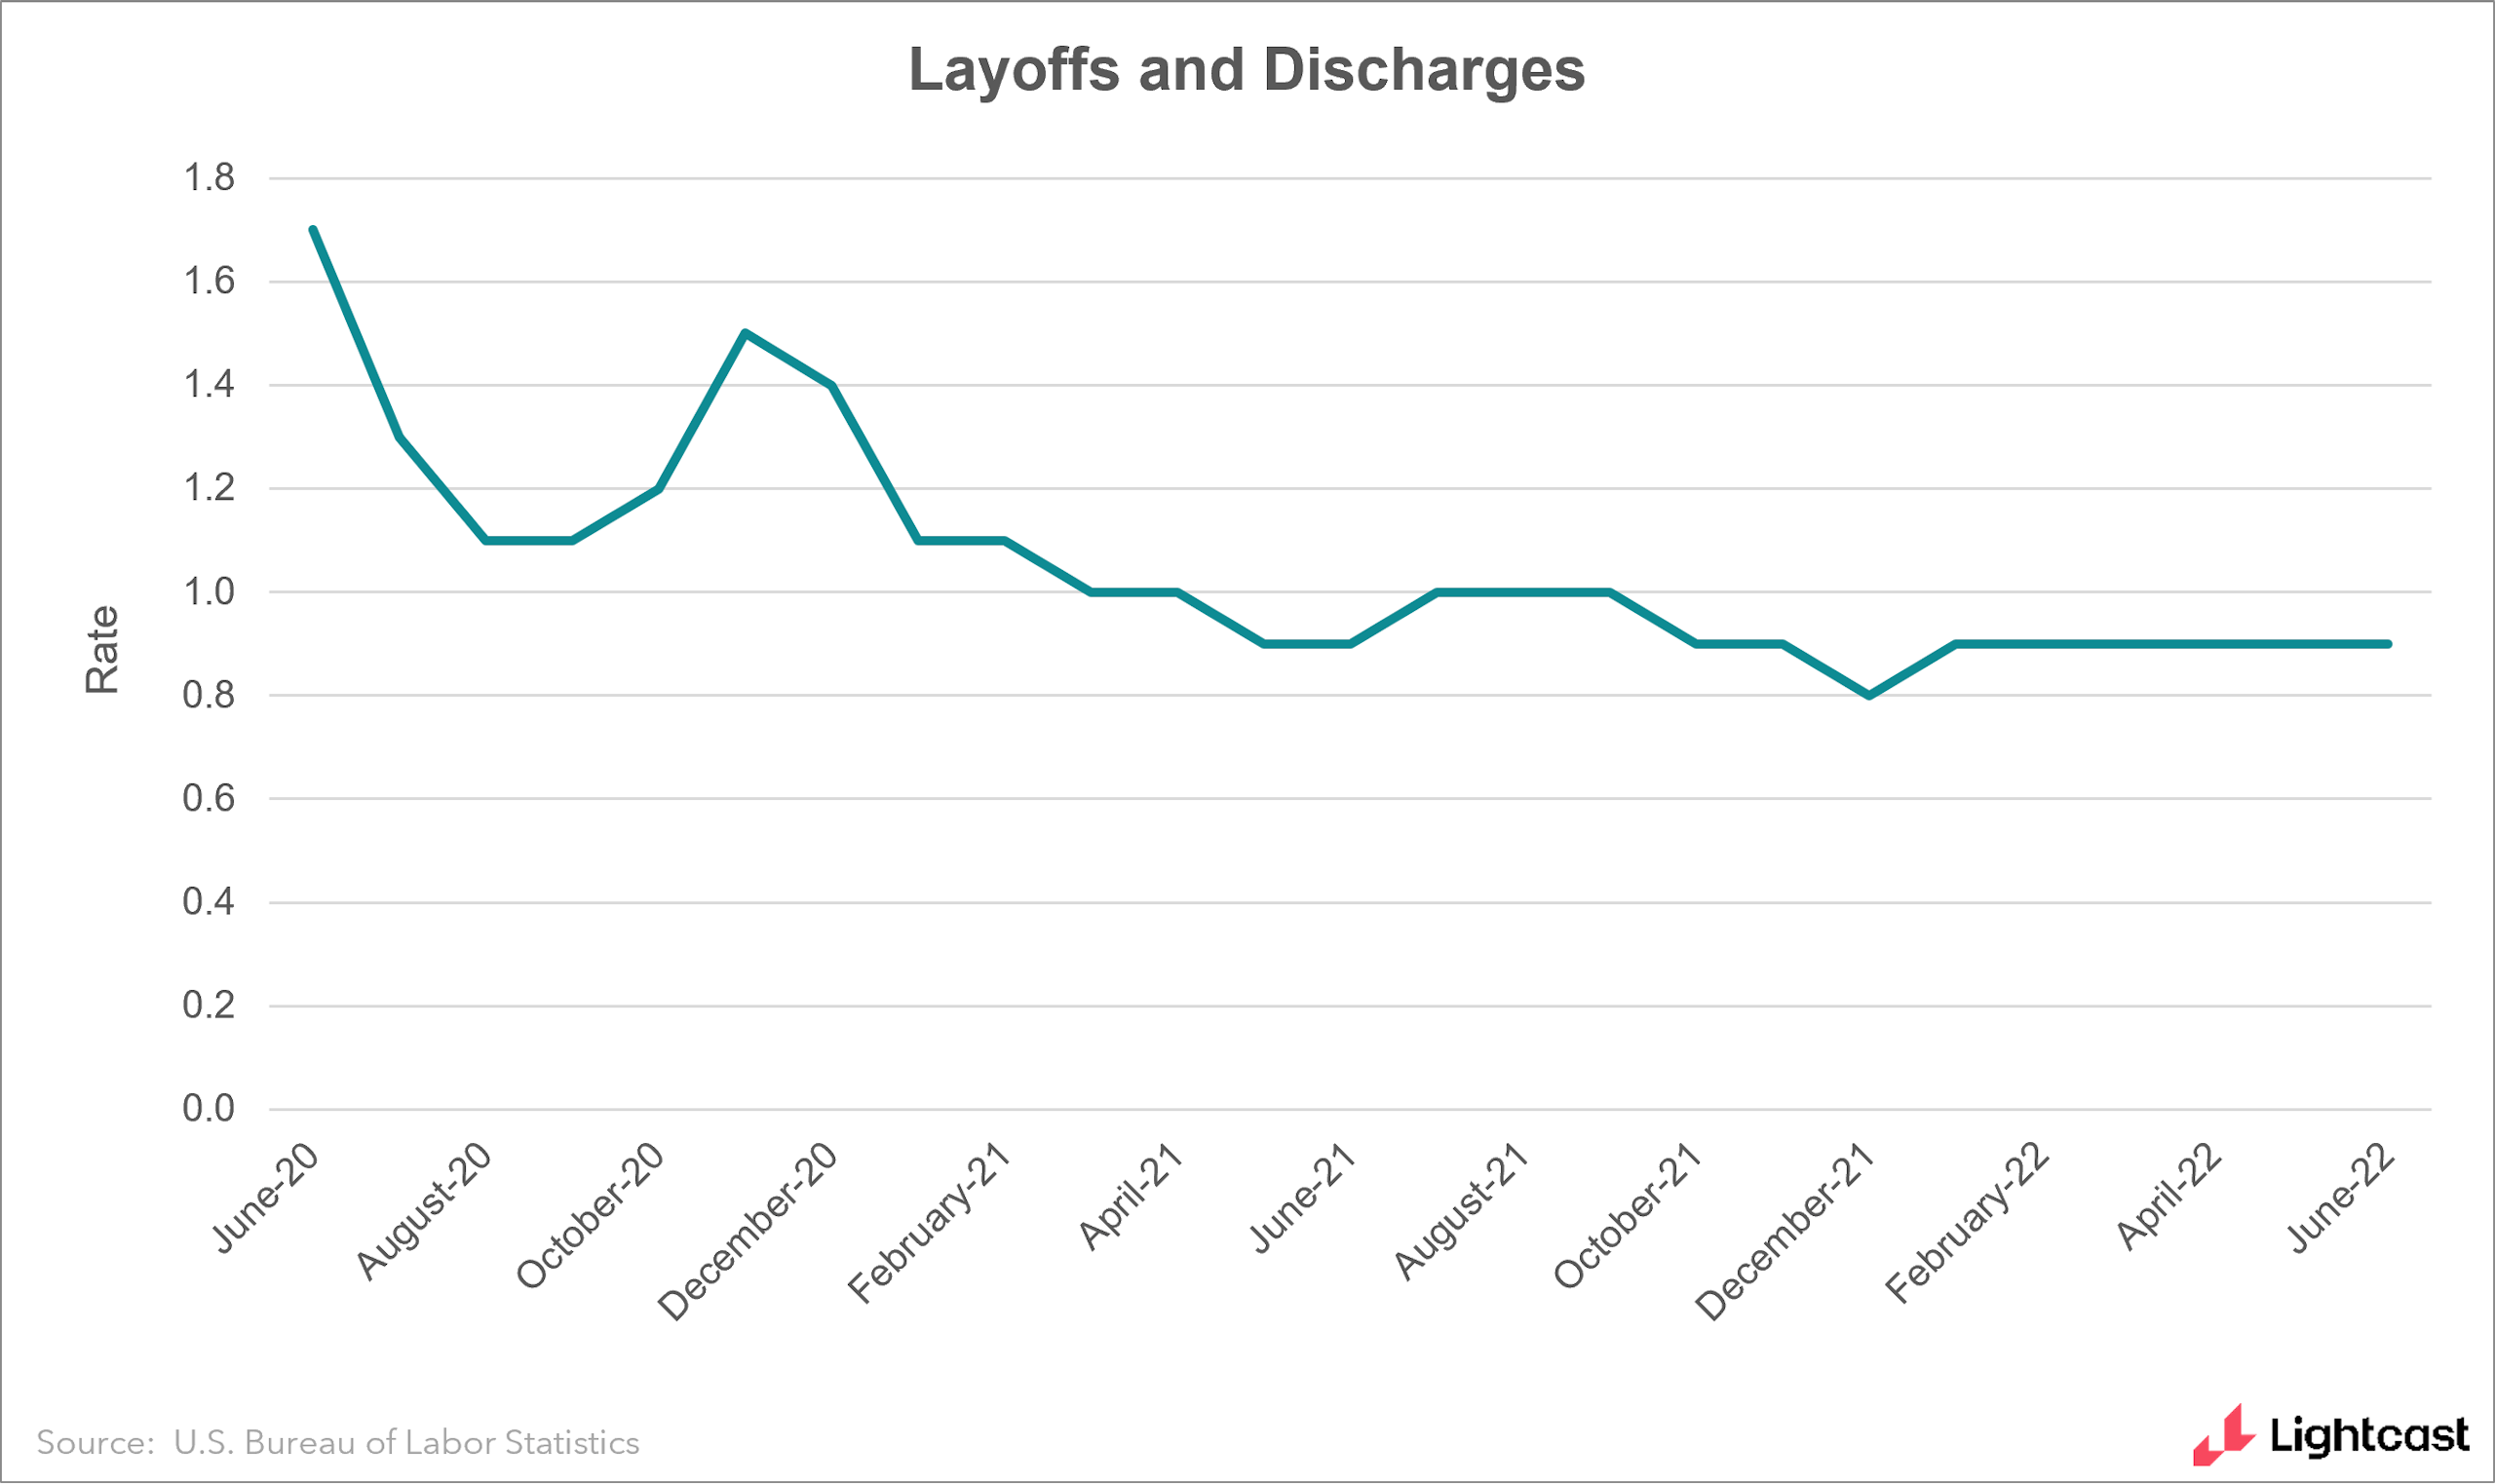 Graph of layoffs and discharges over time, showing a consistent rate near 0.9%